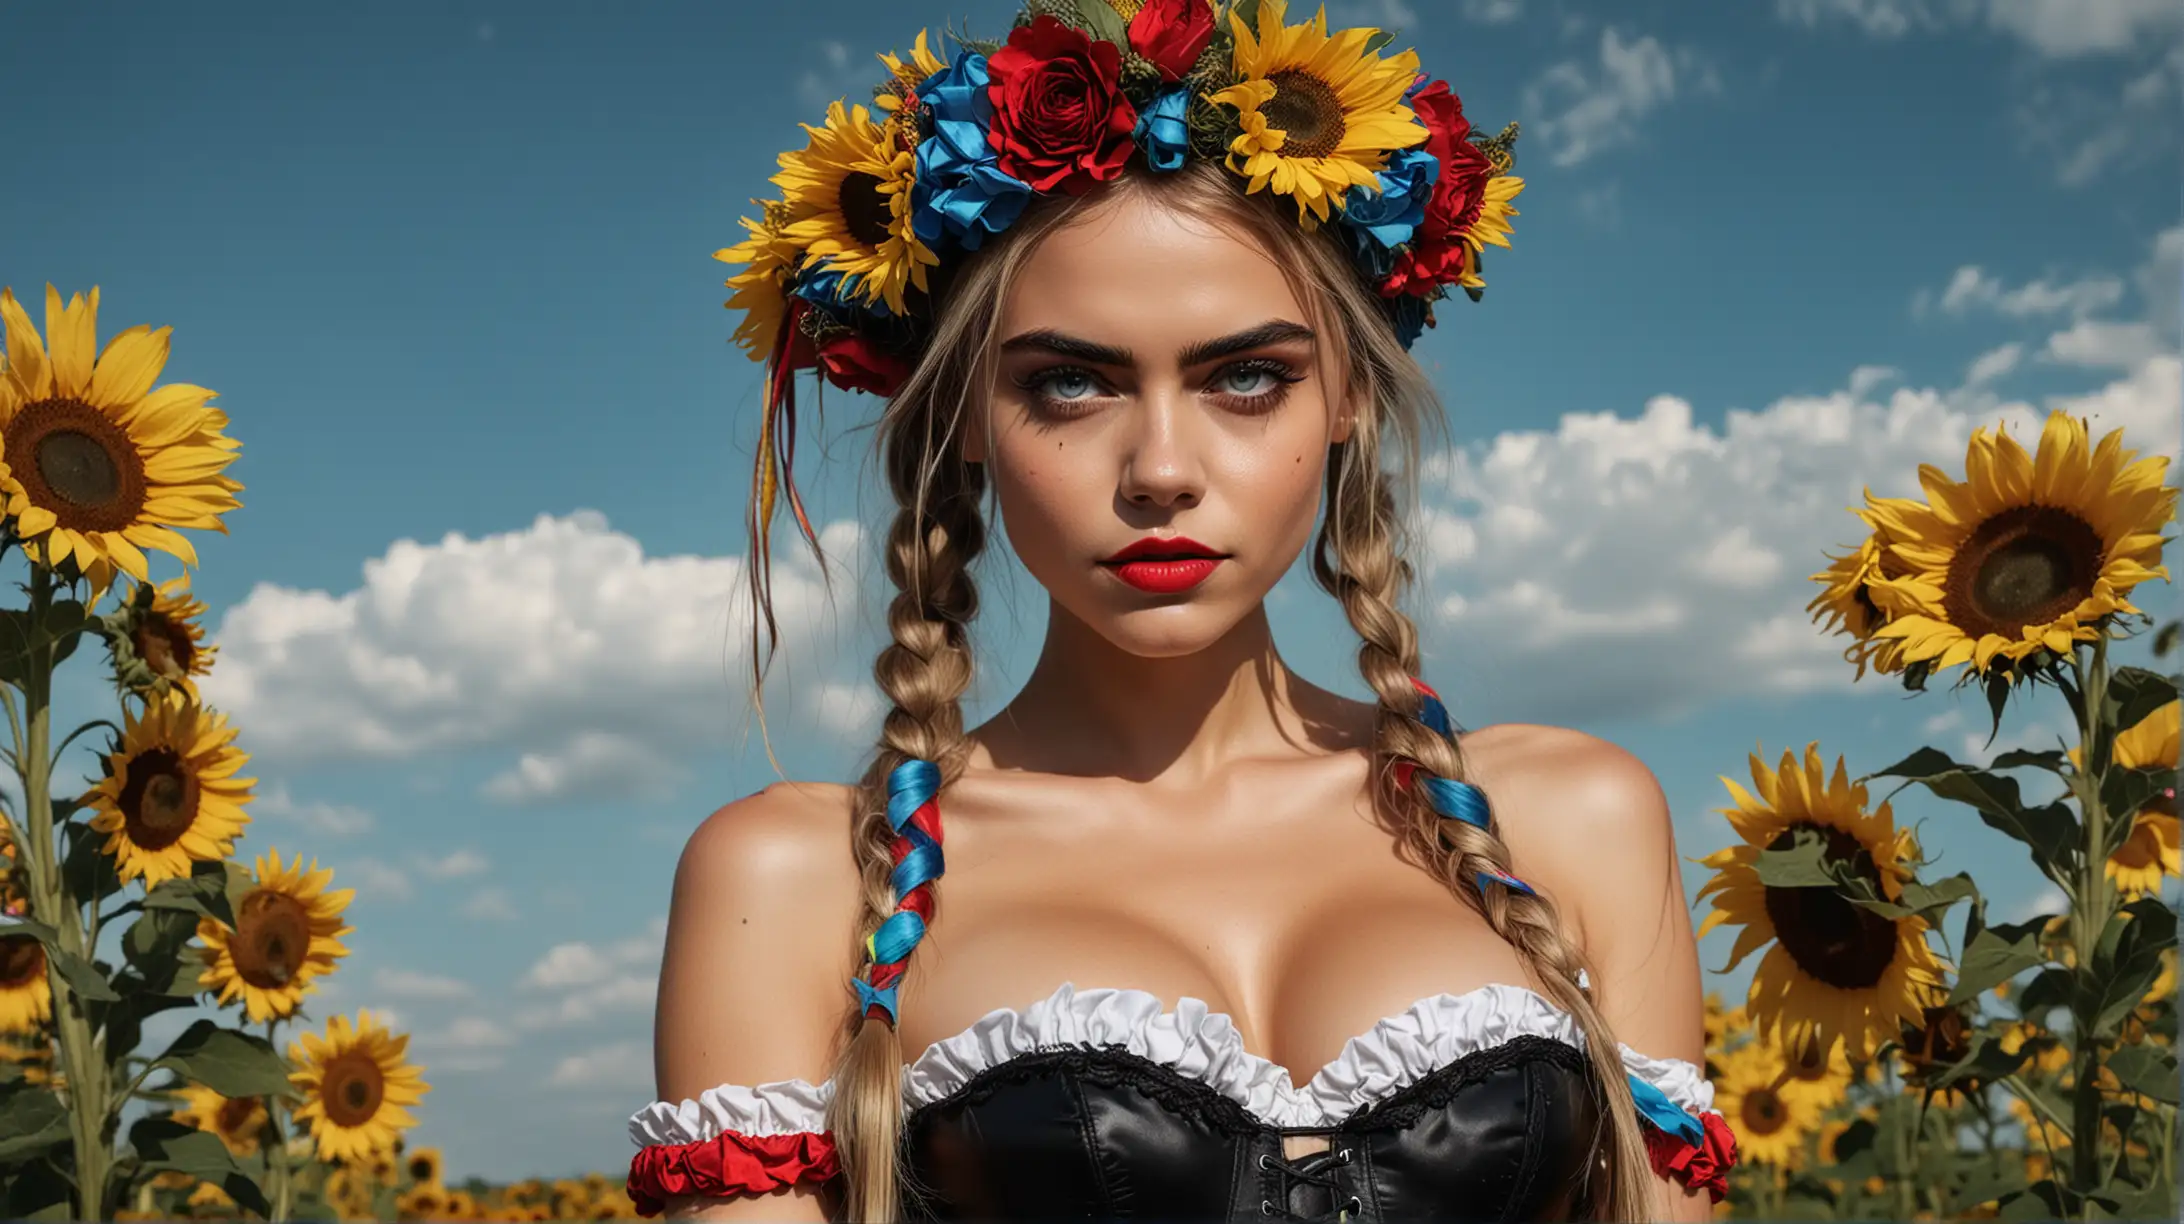 Fantasy Style Portrait Cara Delevingne as Mavka with Rainbow Ribbons and Sunflower Wreath